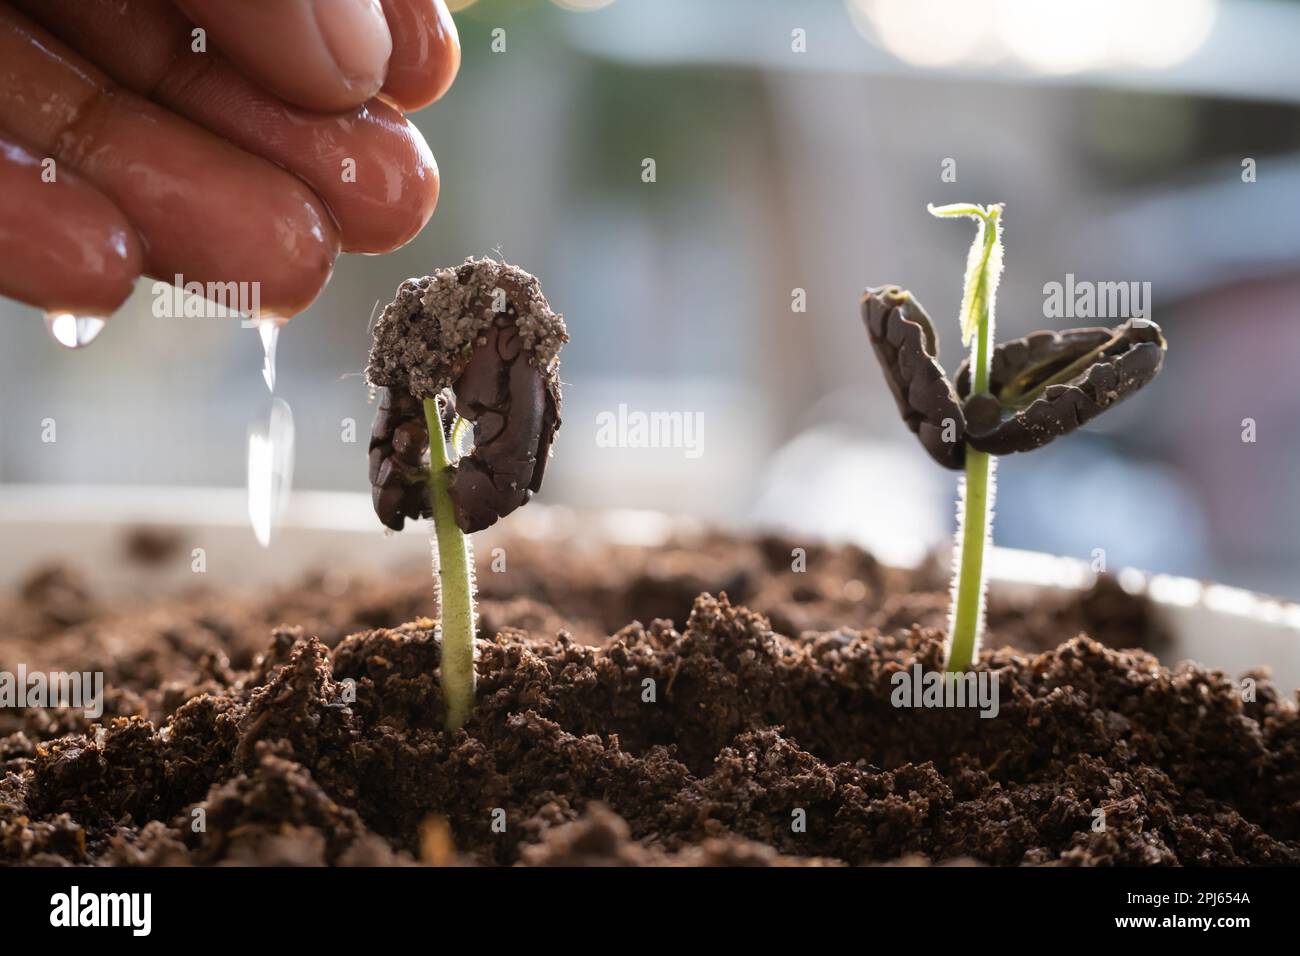 Tree seeds grow in fertile soil and farmers water the trees. Natural environment preservation concept. Stock Photo